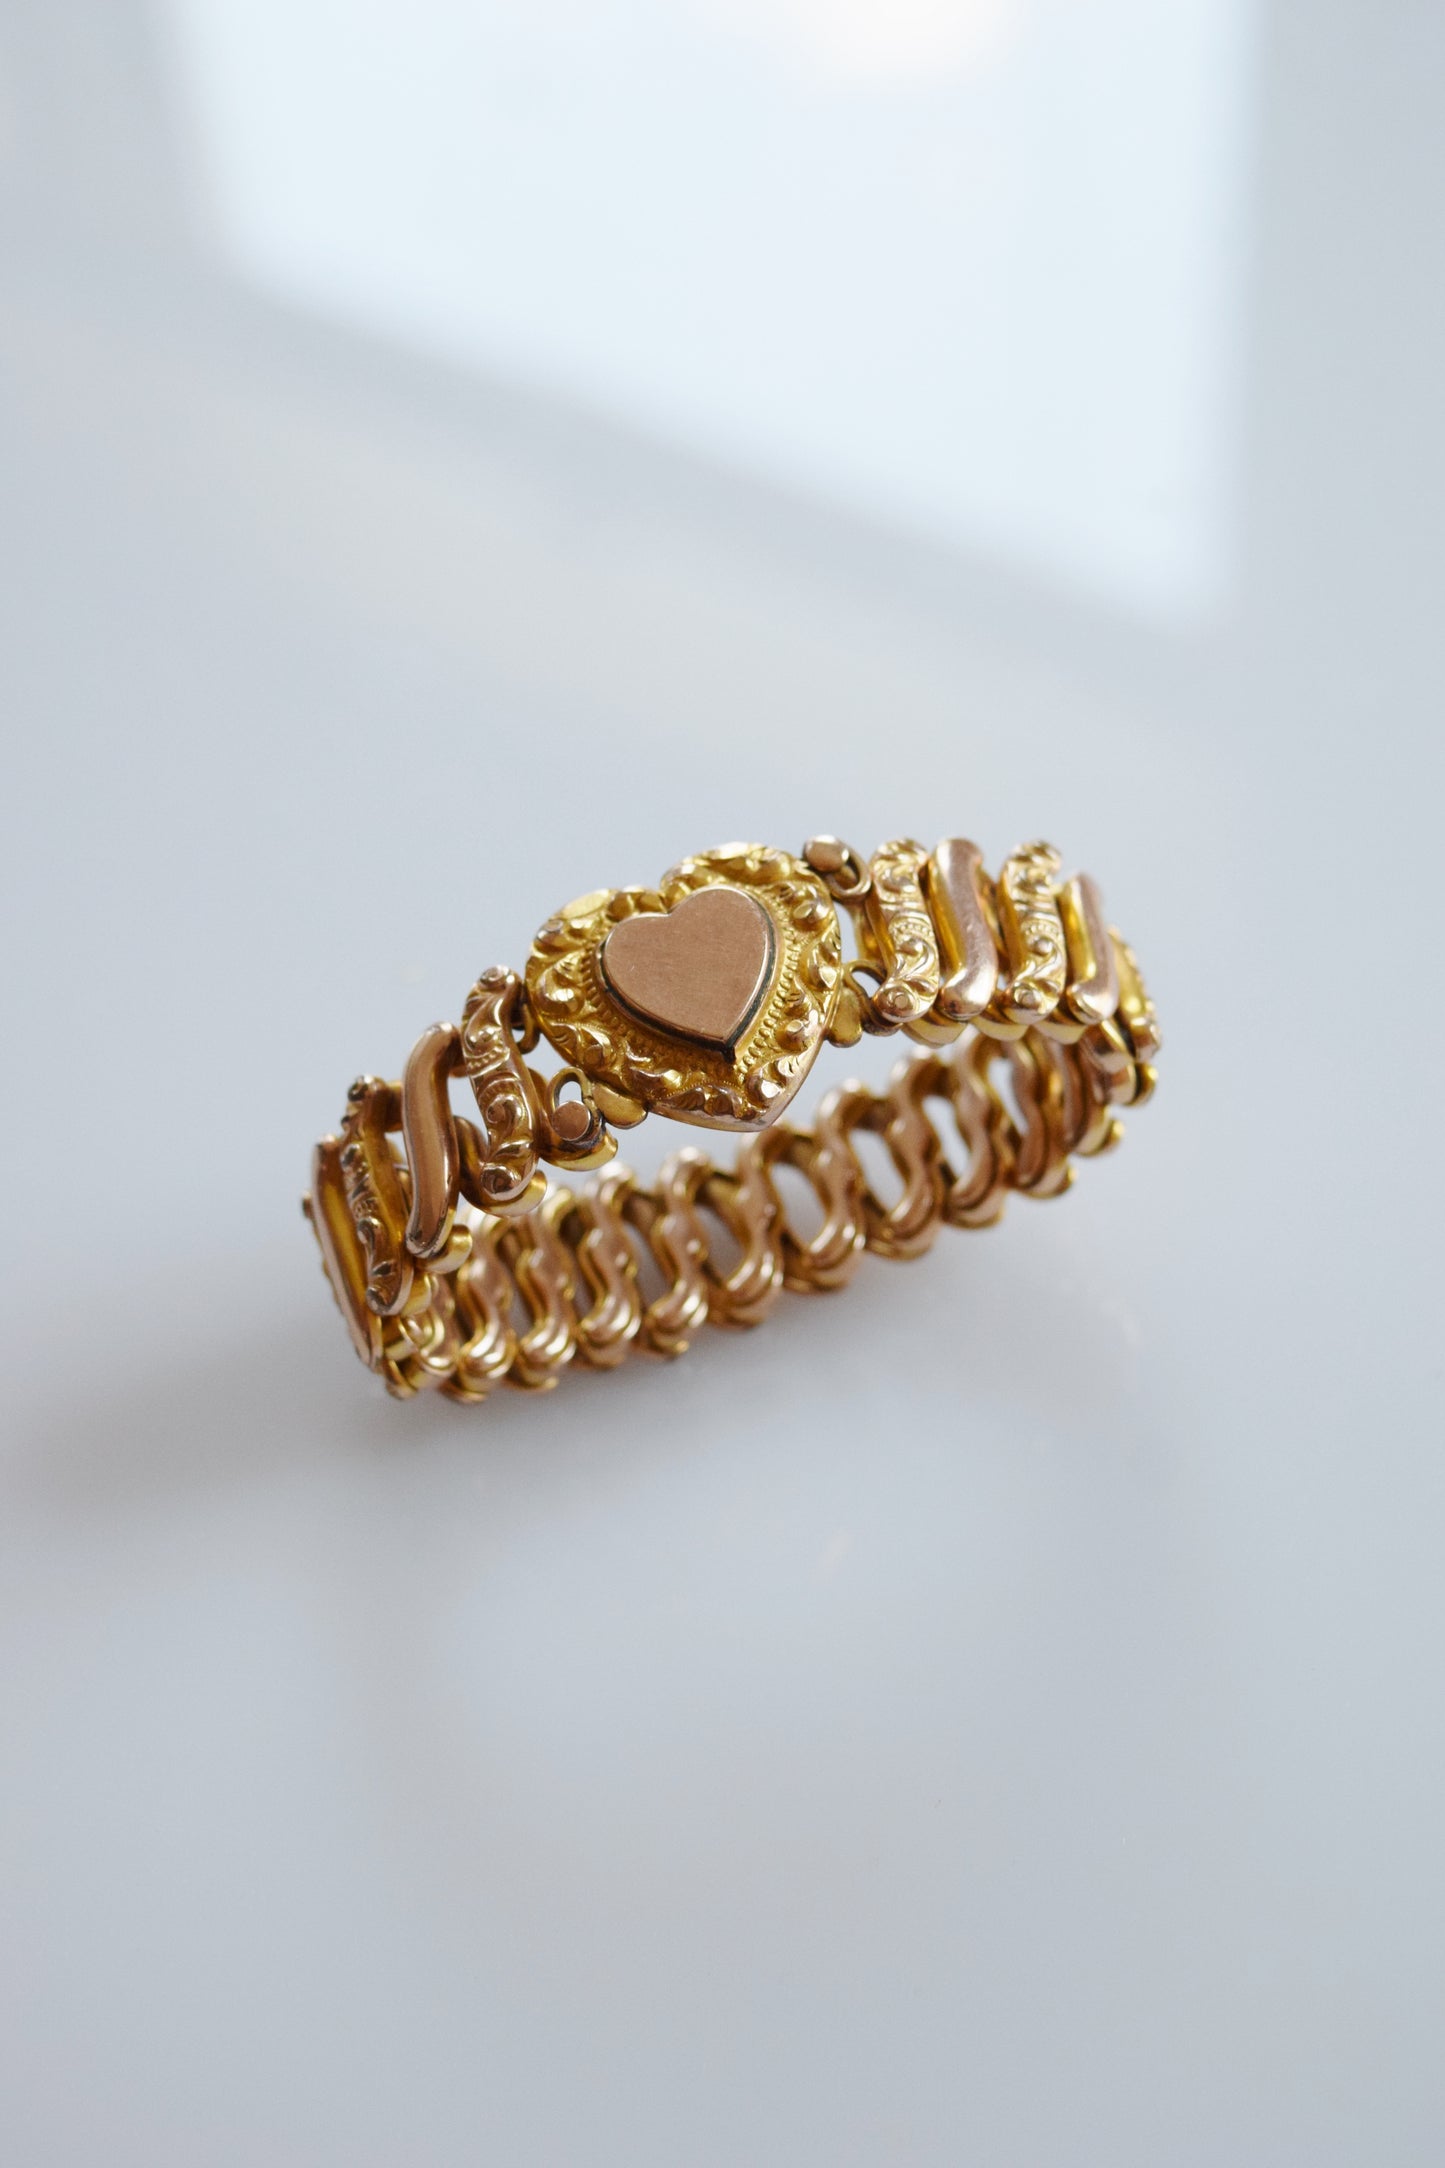 Victorian Revival Sweetheart Expansion Bracelet with Heart | 1920s/30s